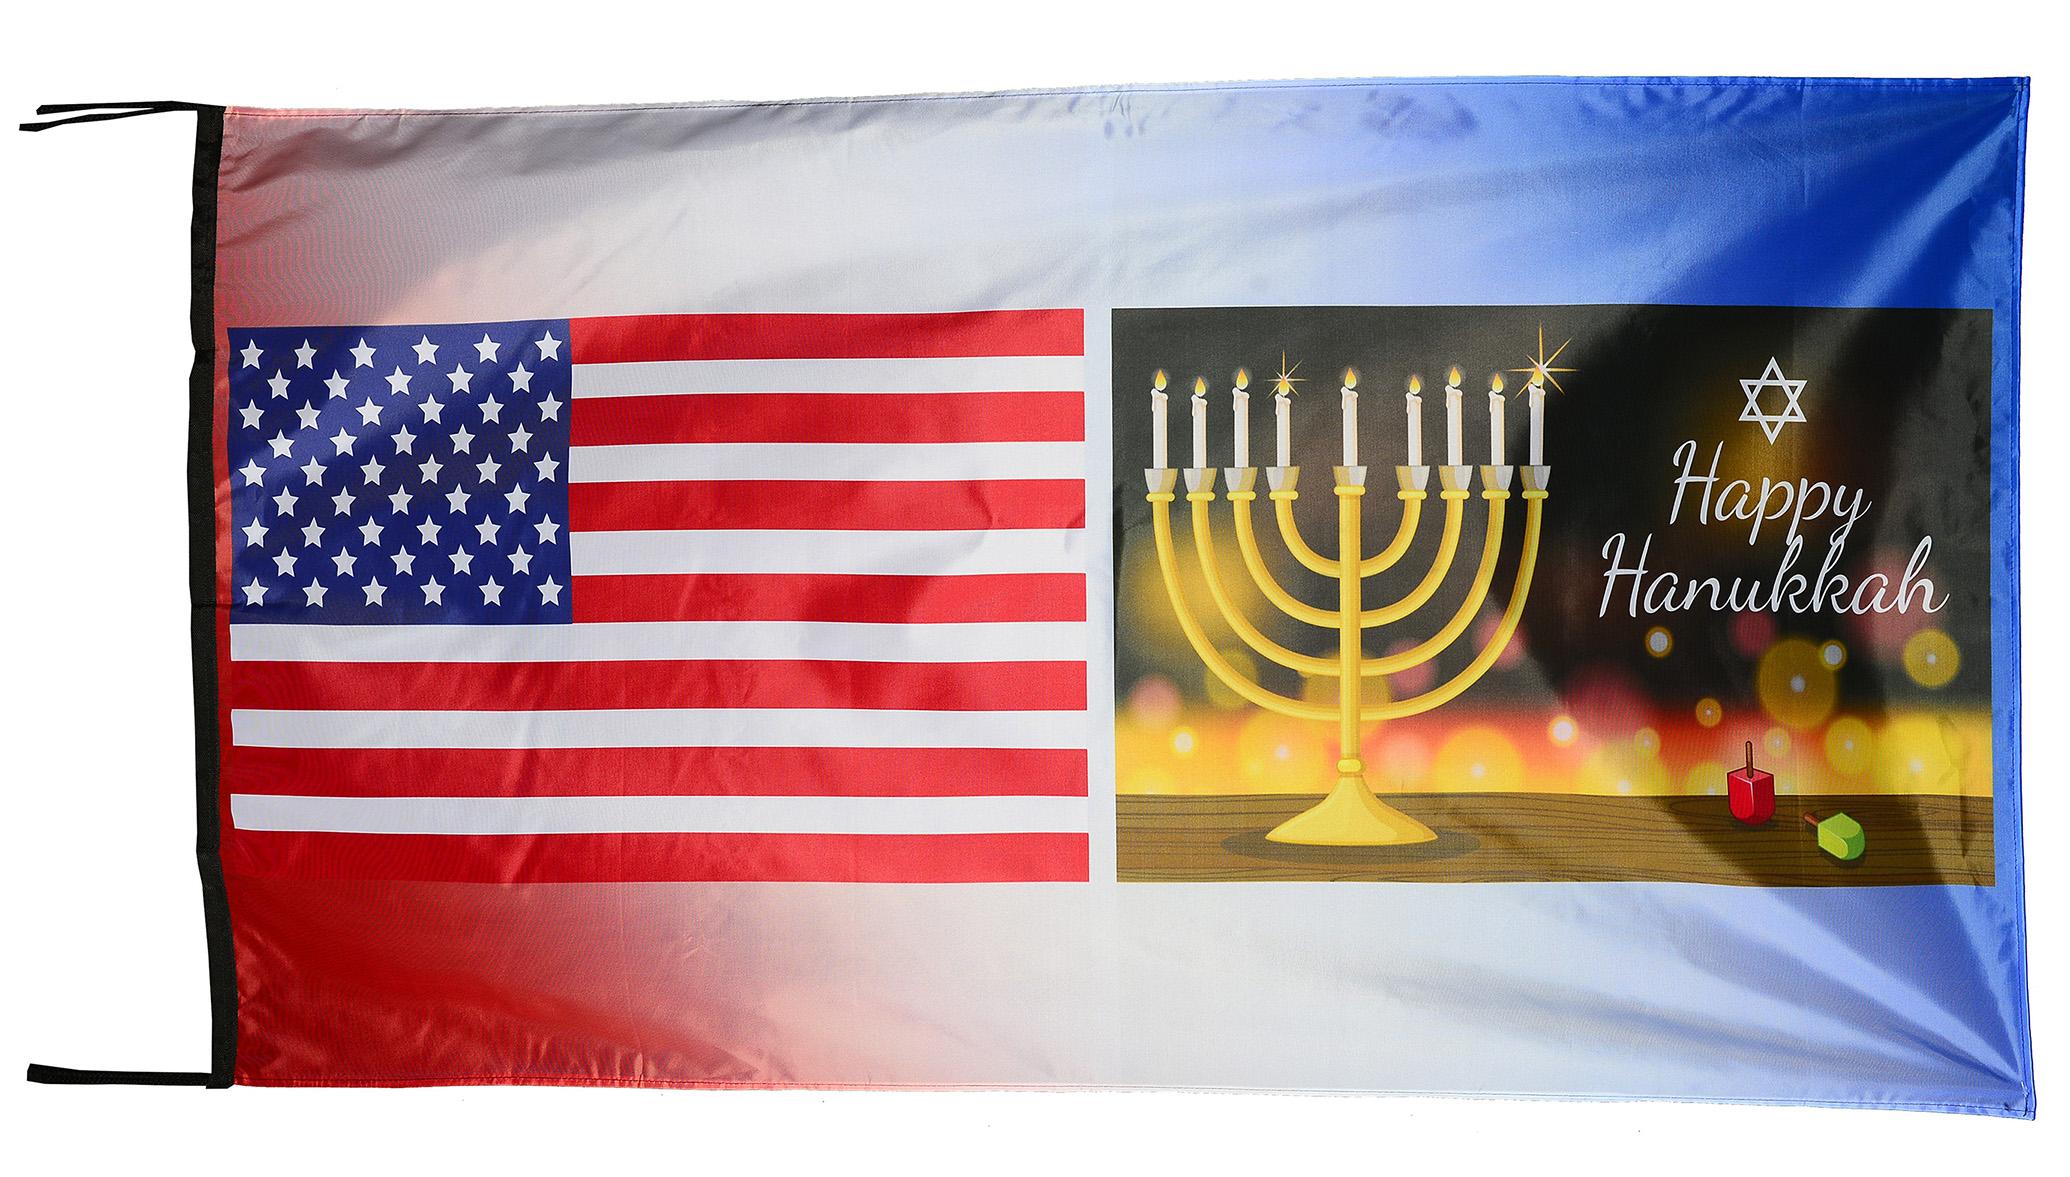 Flag  064 USA / US Country / United States Of America and Star Of David / Jew / Jewish / Patriotic / Pride Hybrid Weather-Resistant Polyester Outdoor Flag Landscape Banner / Vivid Colors / 3 X 5 FT (150 x 90cm) International Flags for Sale